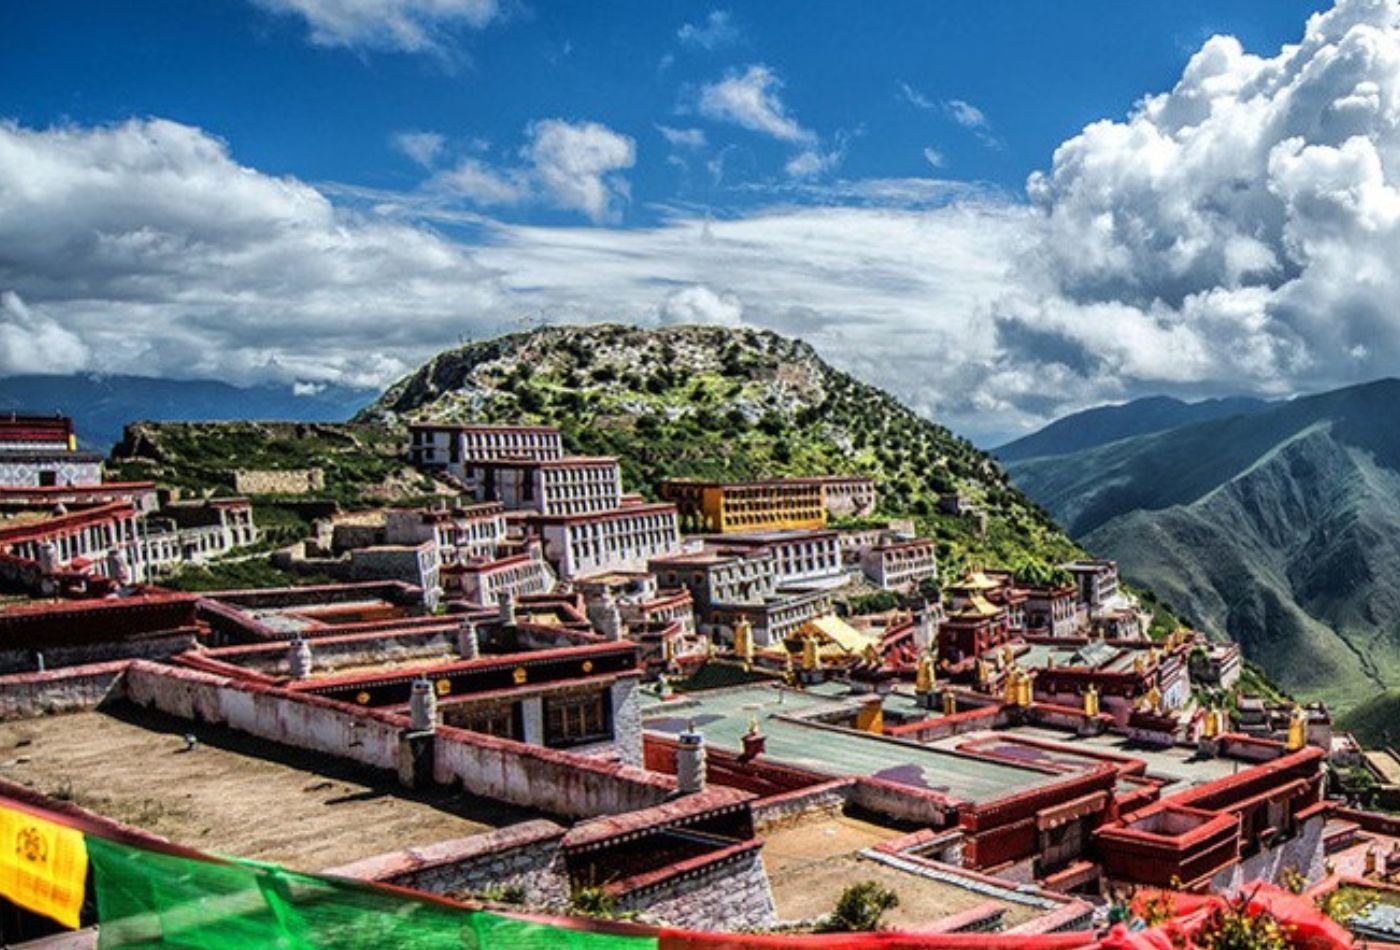 Ganden Monastery, with its red roof and surrounded by clouds in the sky, sits perched atop a hillside with a stunning view of the surrounding landscape.